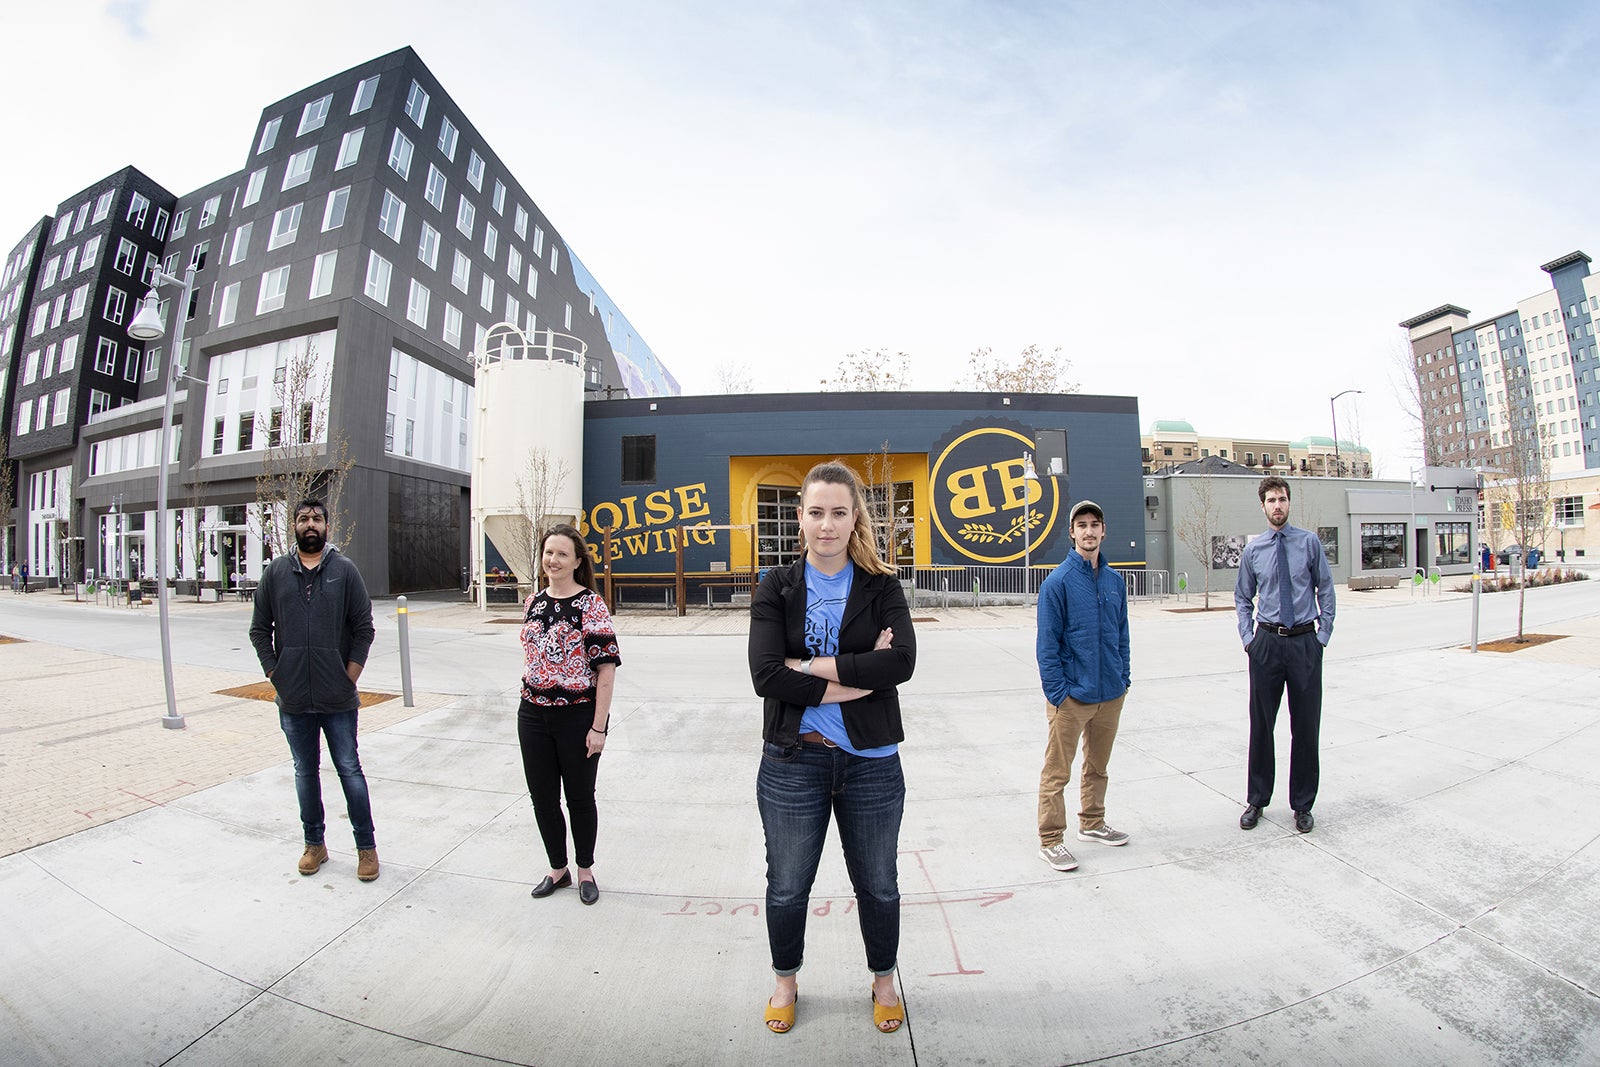 5 students in front of Boise Brewing